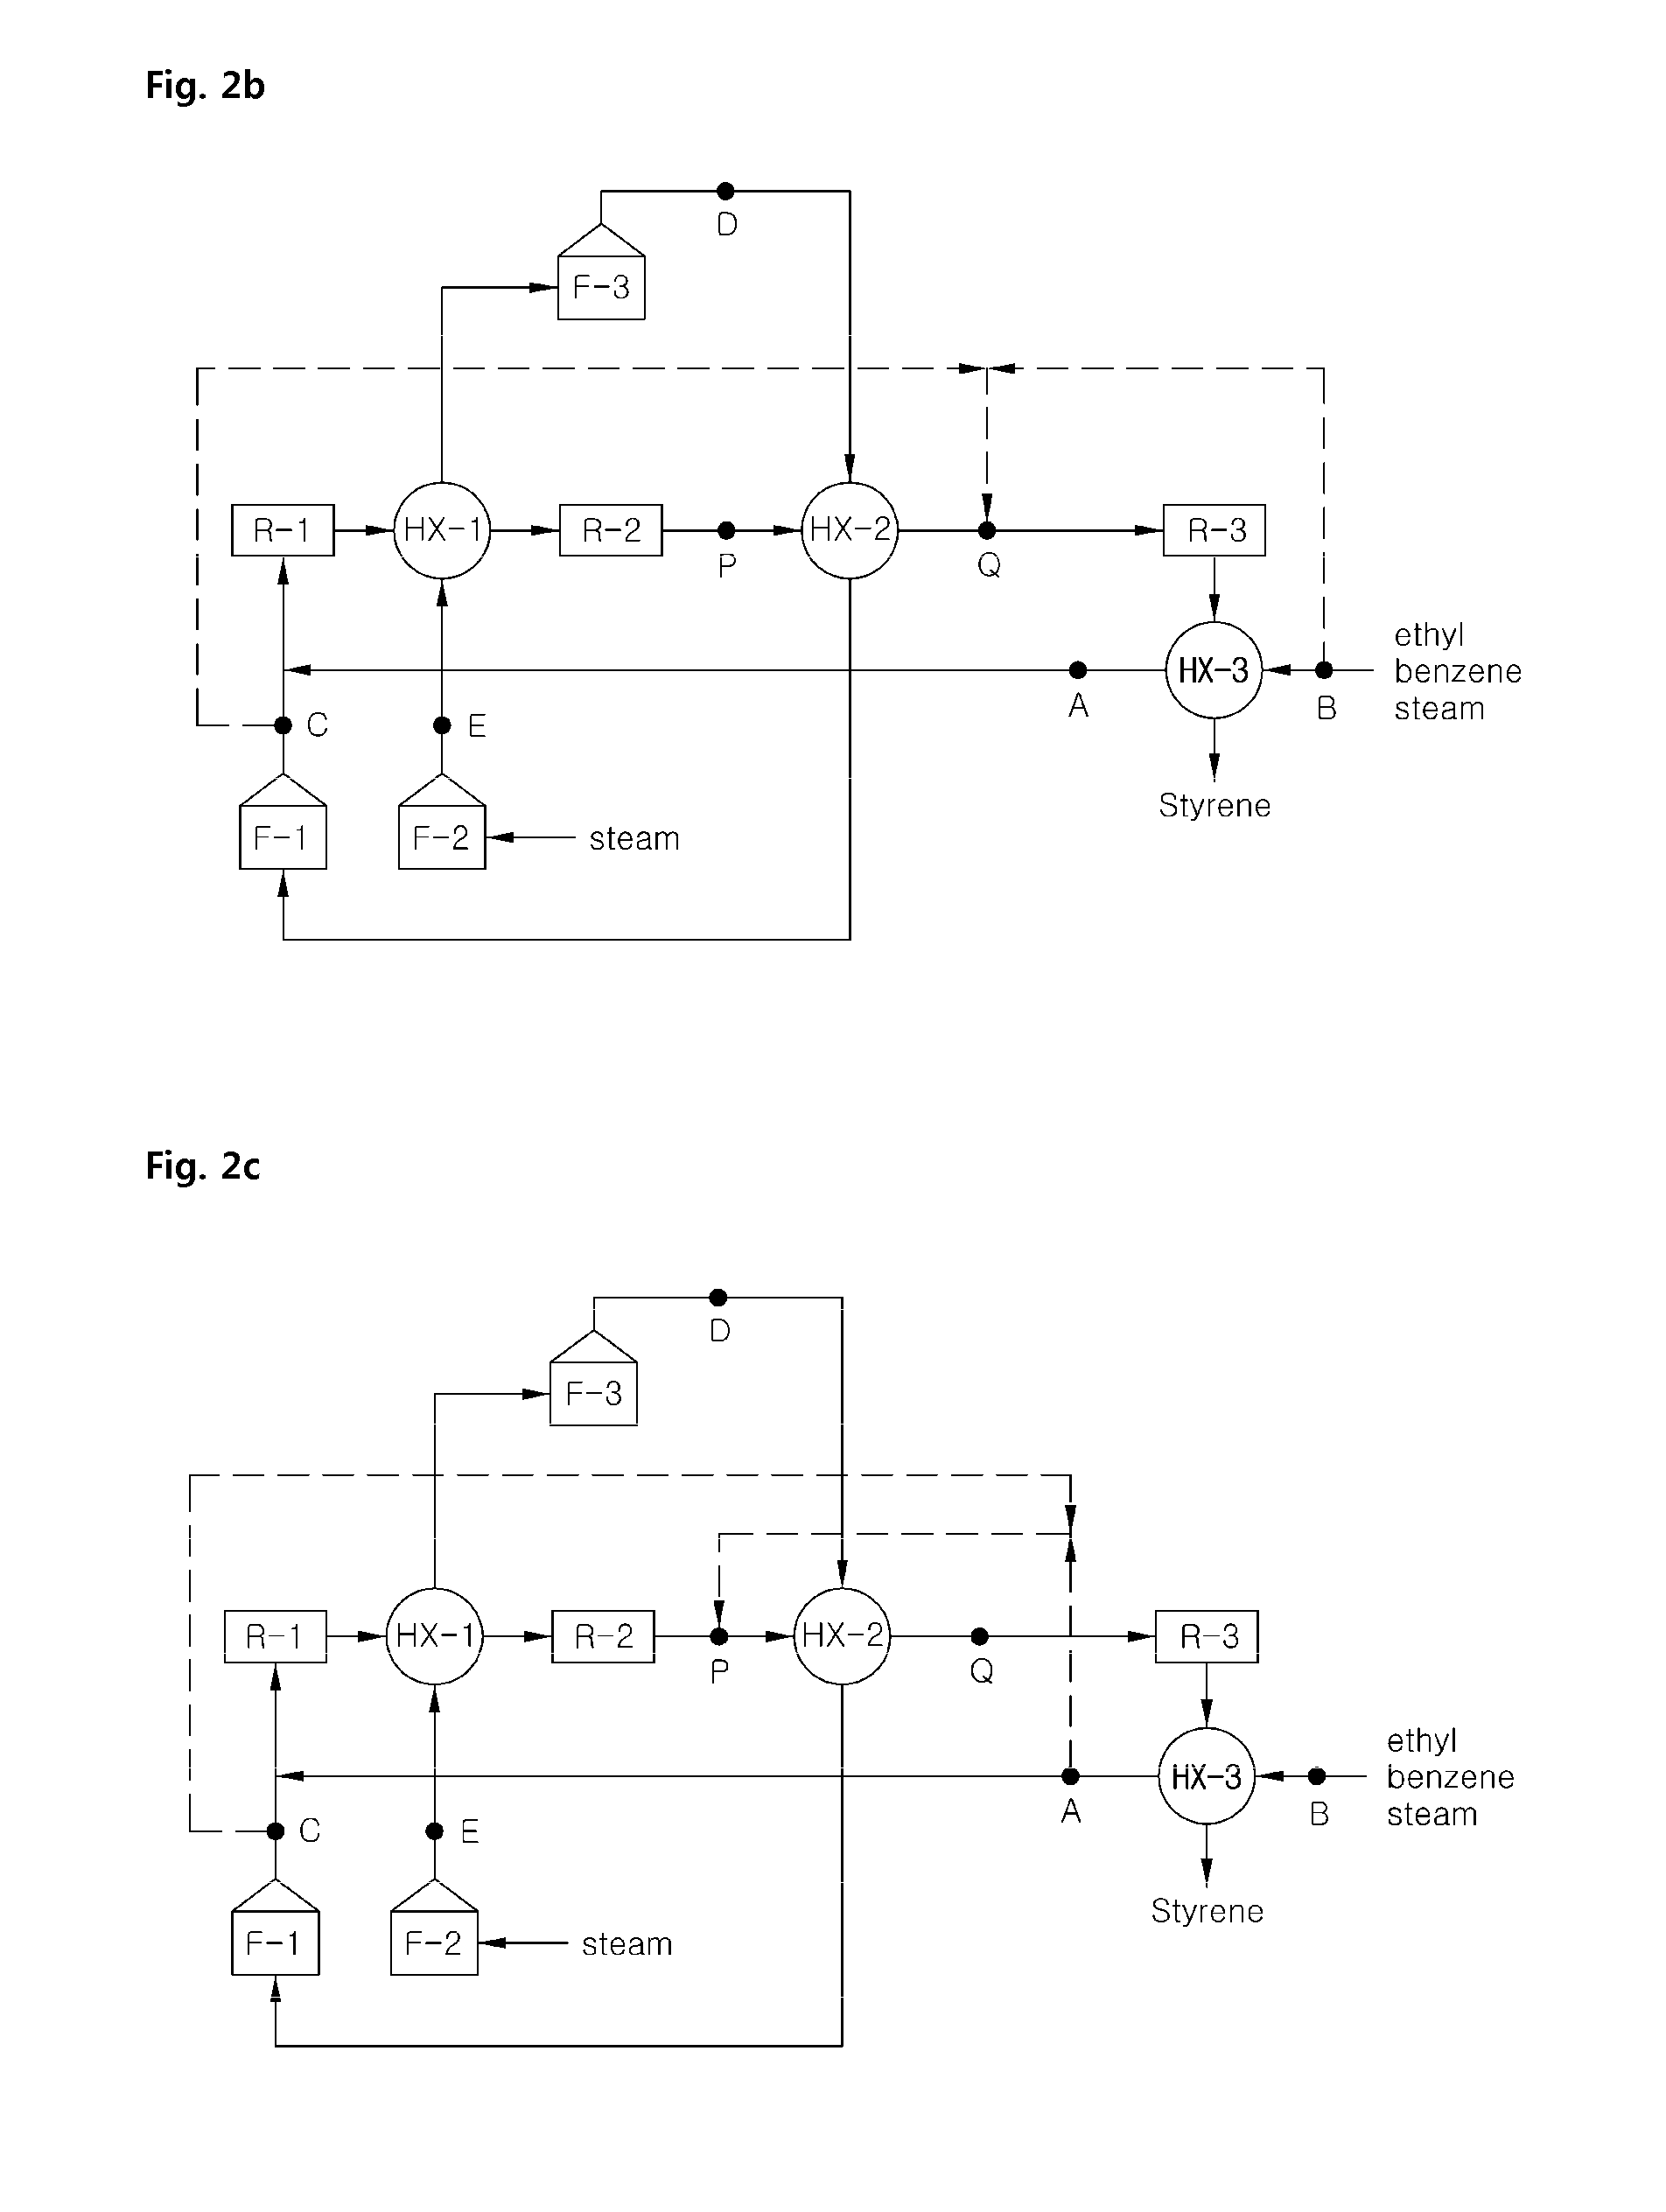 Method for improving productivity and process stability in styrene manufacturing system having multiple reactors connected in series